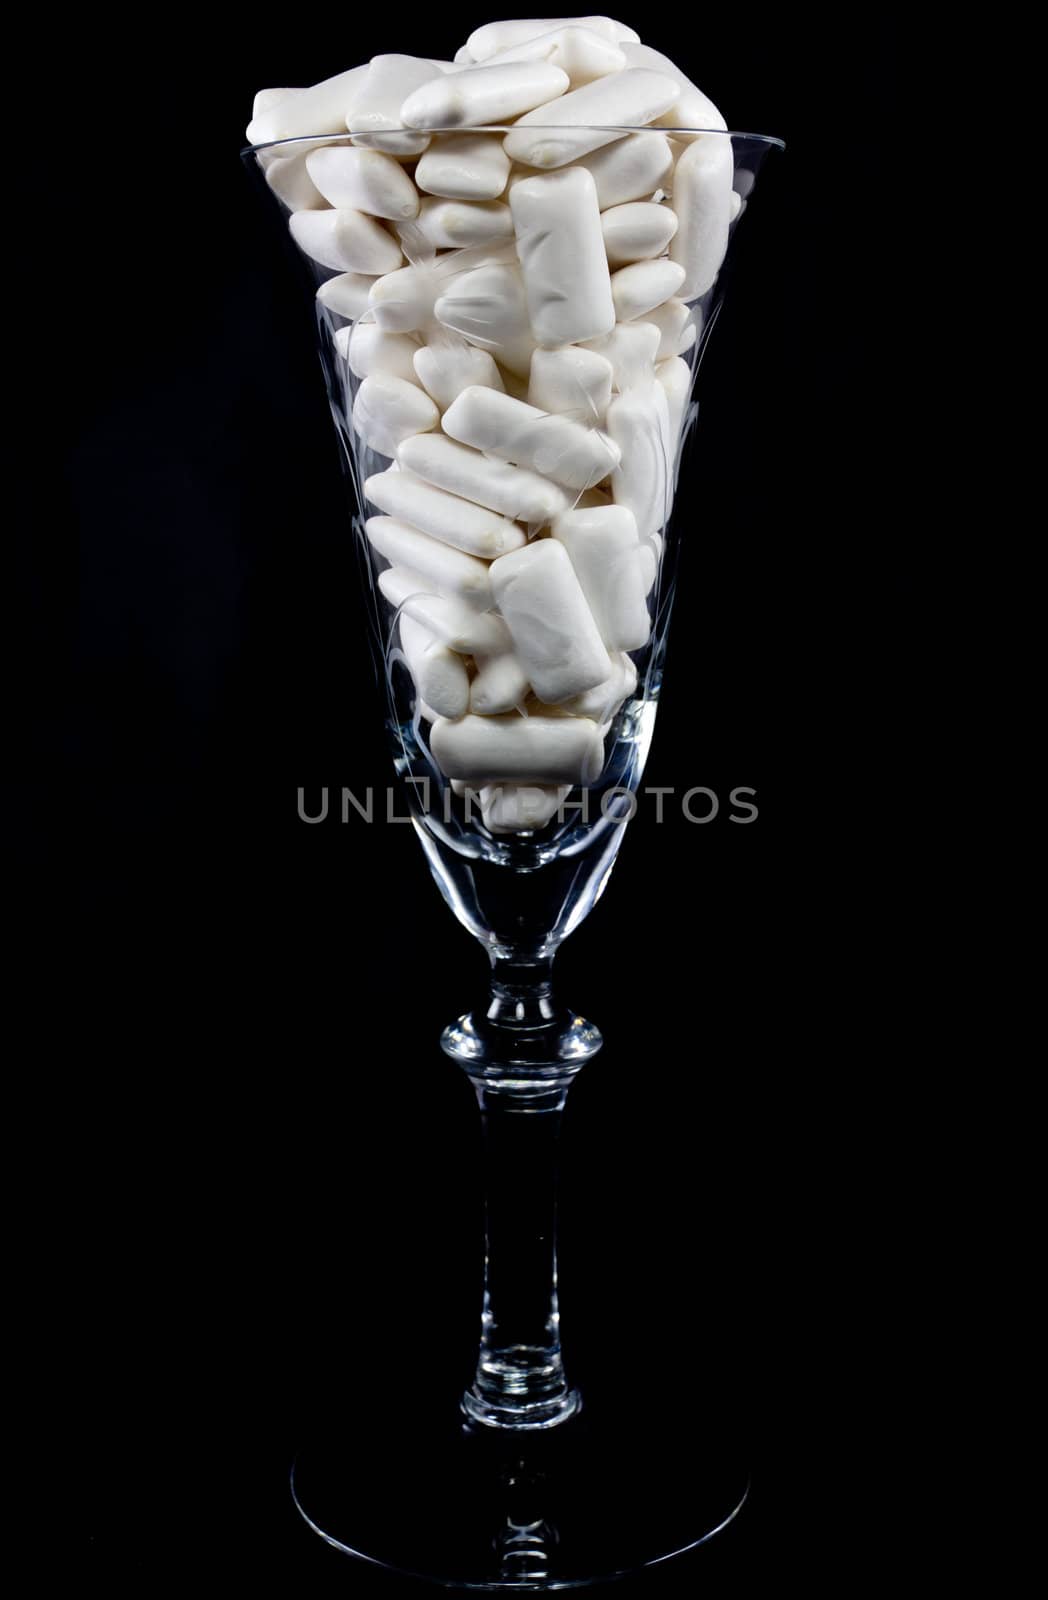 Picture of a bunch of white gums in a wine glass